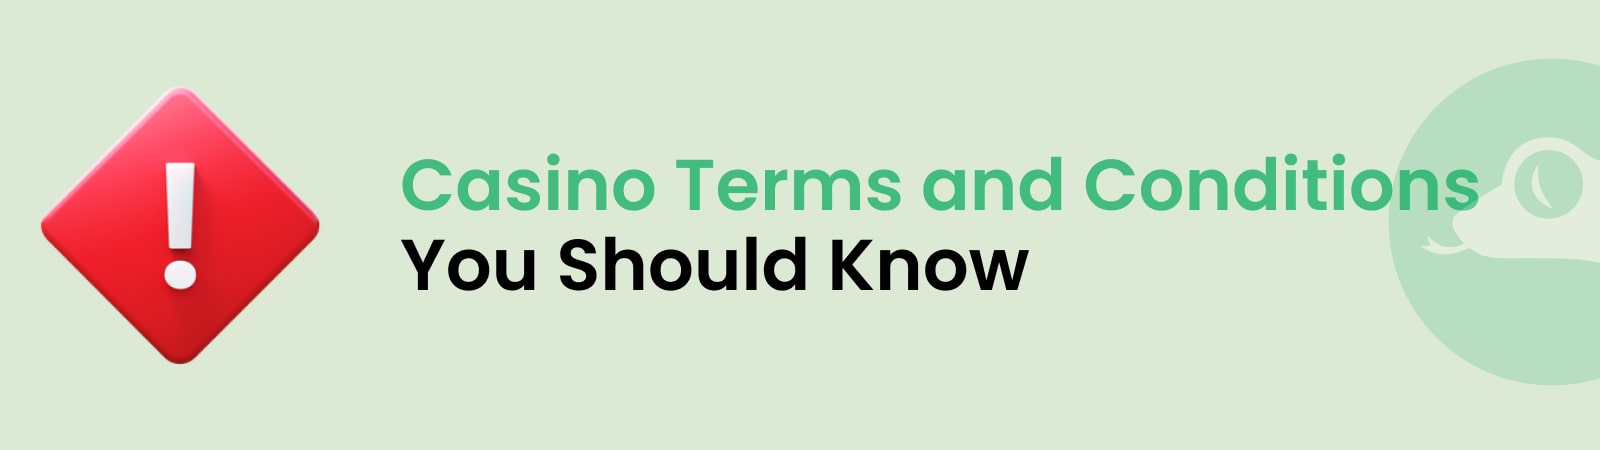 casino terms and conditions you should know